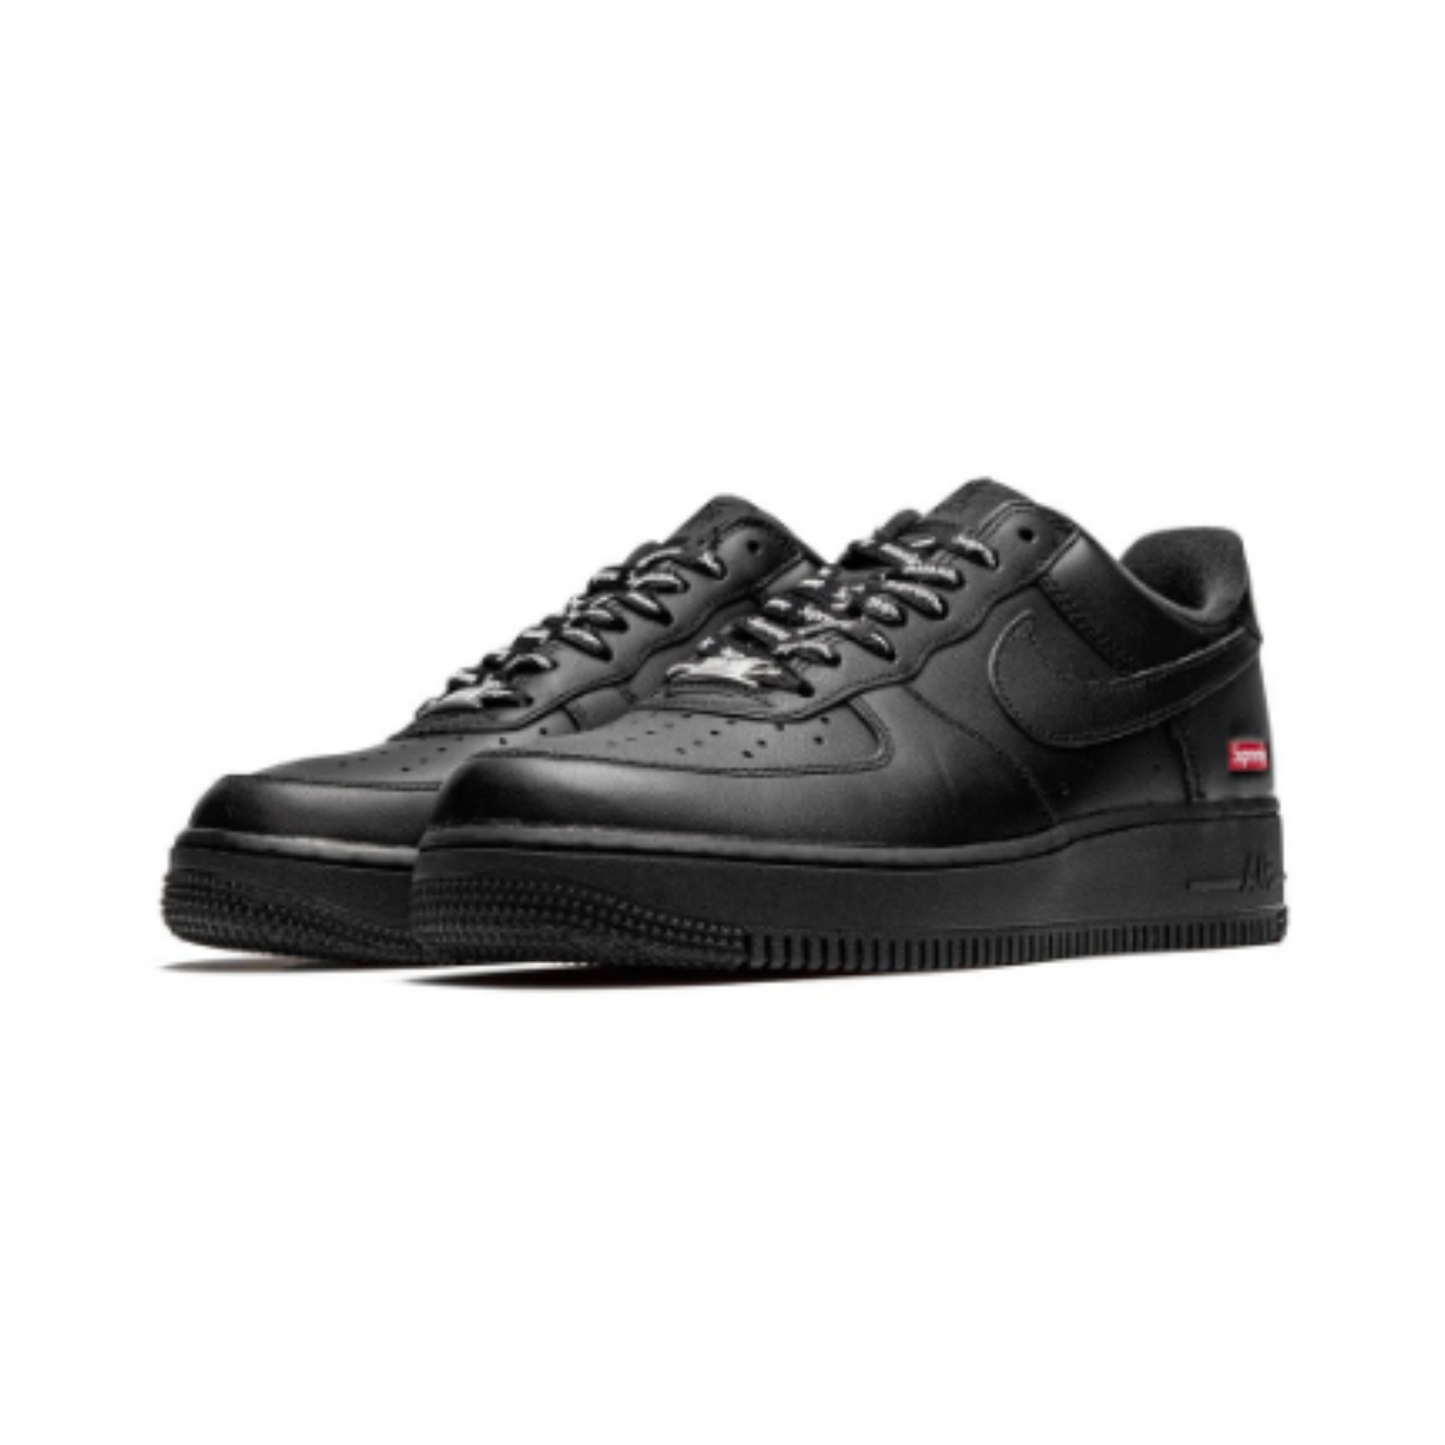 THE SUPREME X AIR FORCE 1 LOW - BLACK